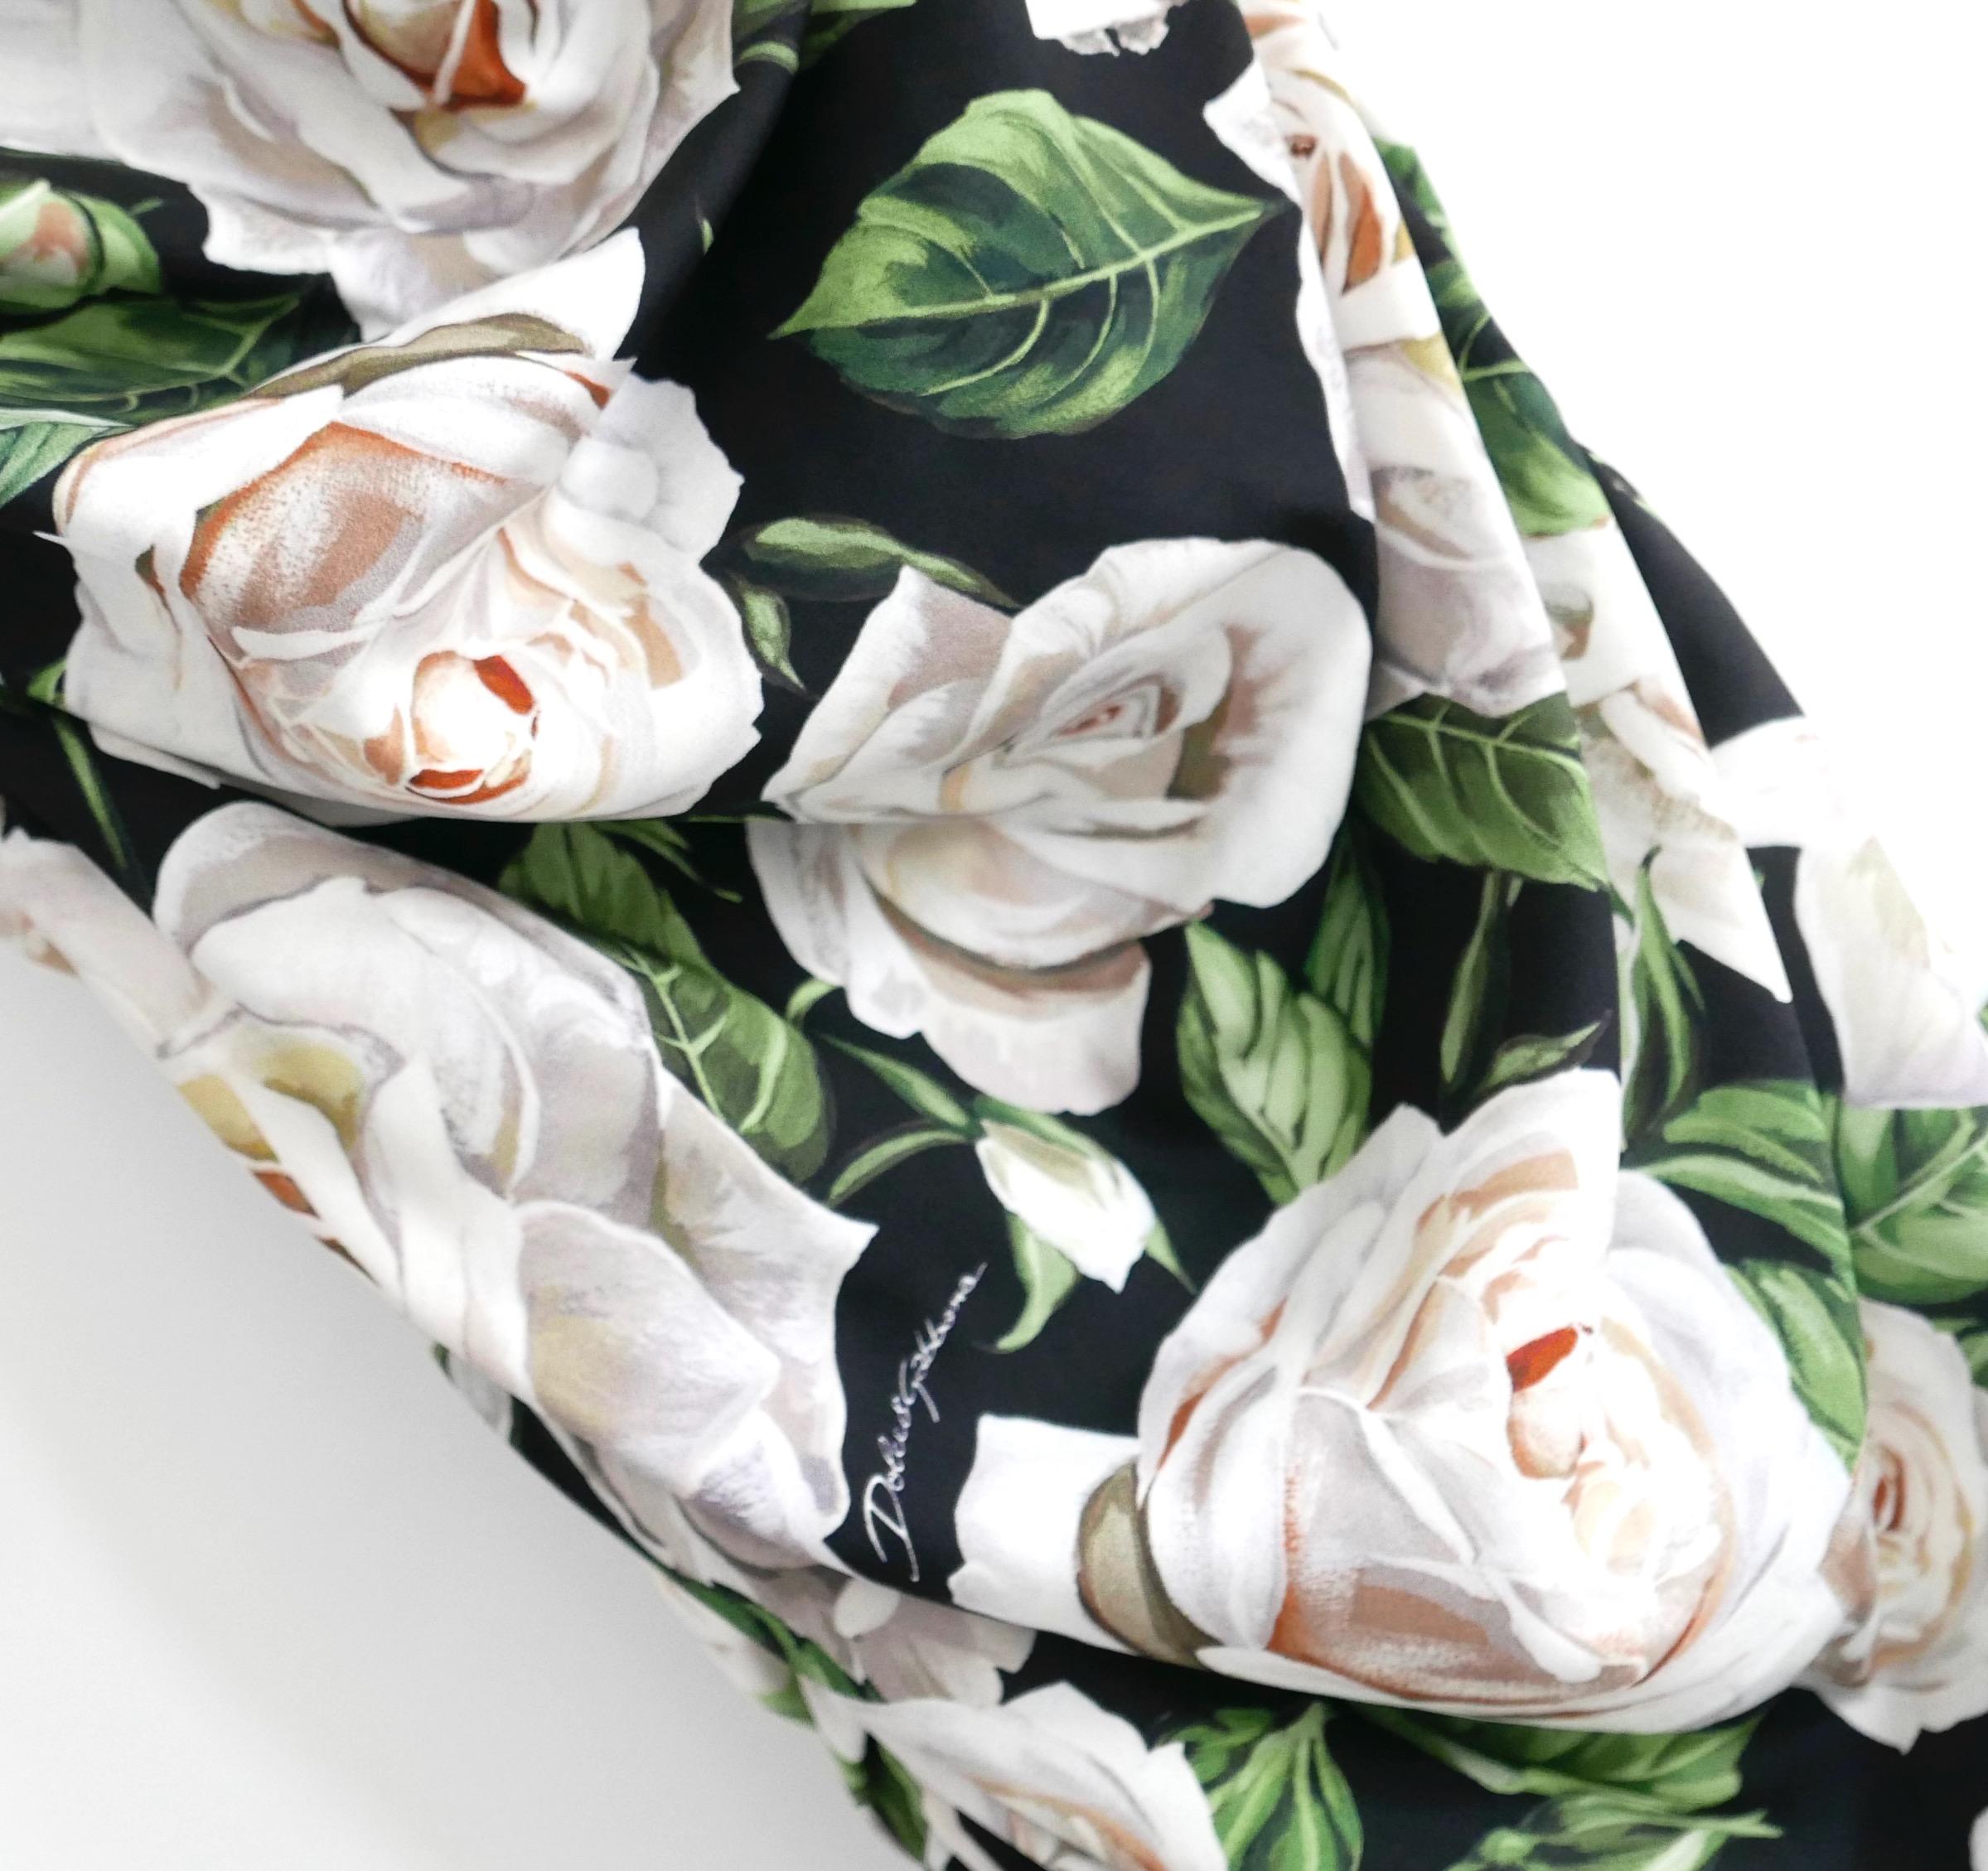 Iconic Dolce & Gabbana white rose print dress. Bought for £1850 and new with tags. Made from super soft white rose printed silk with a black silk lining. It has a superbly flattering form fitting cut with ruched sides, wide brad style straps with